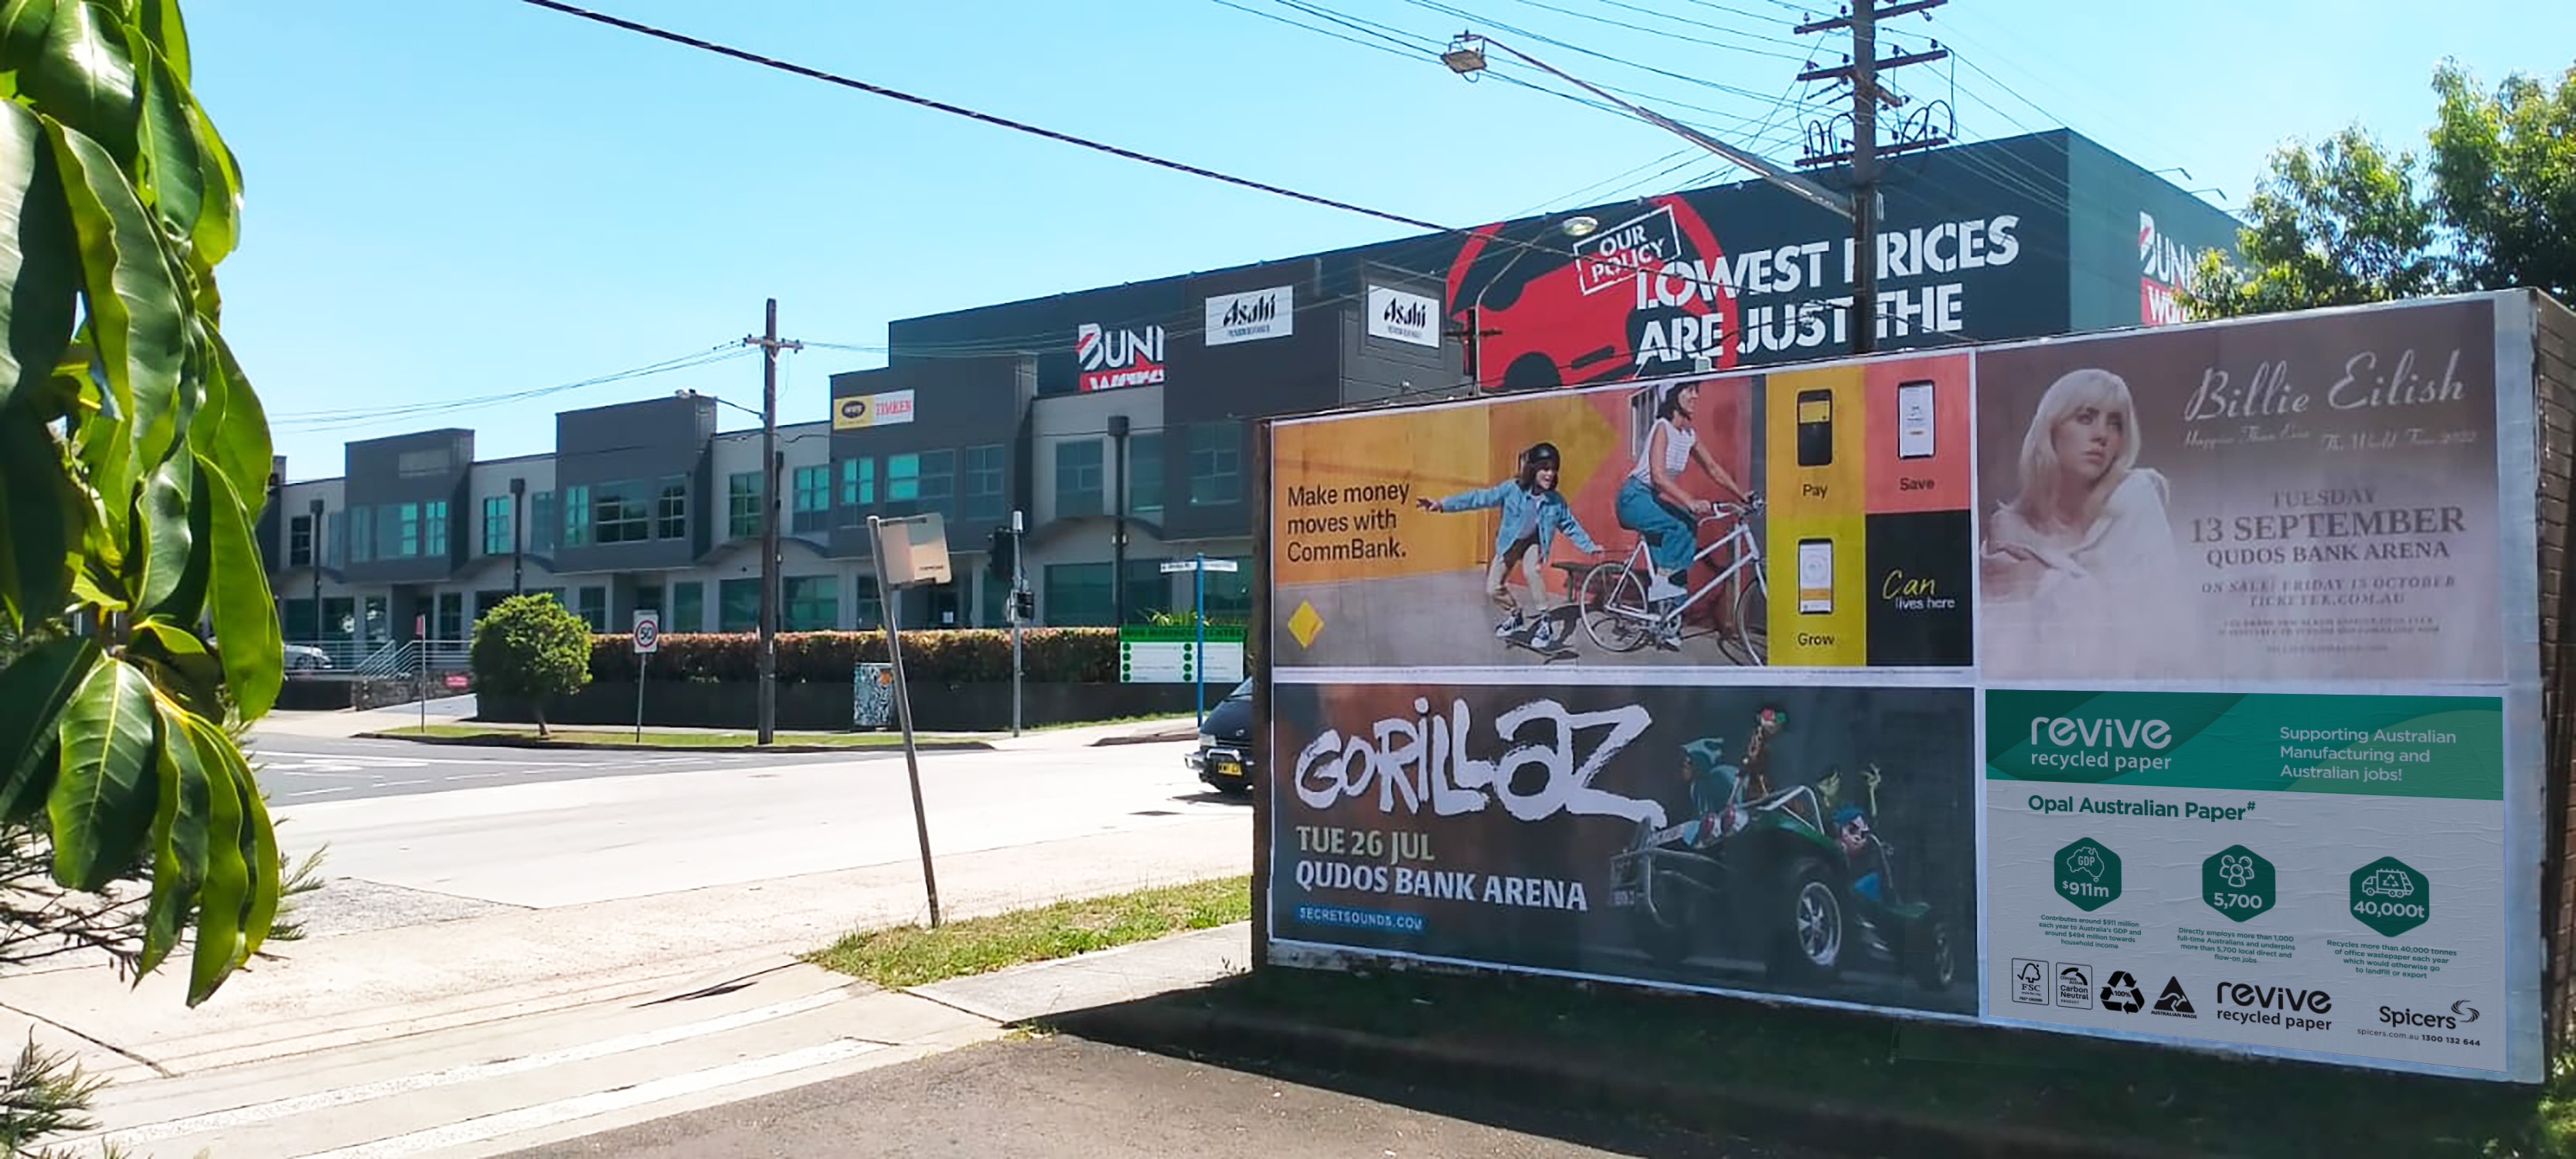 Rock Posters creates more sustainable street posters